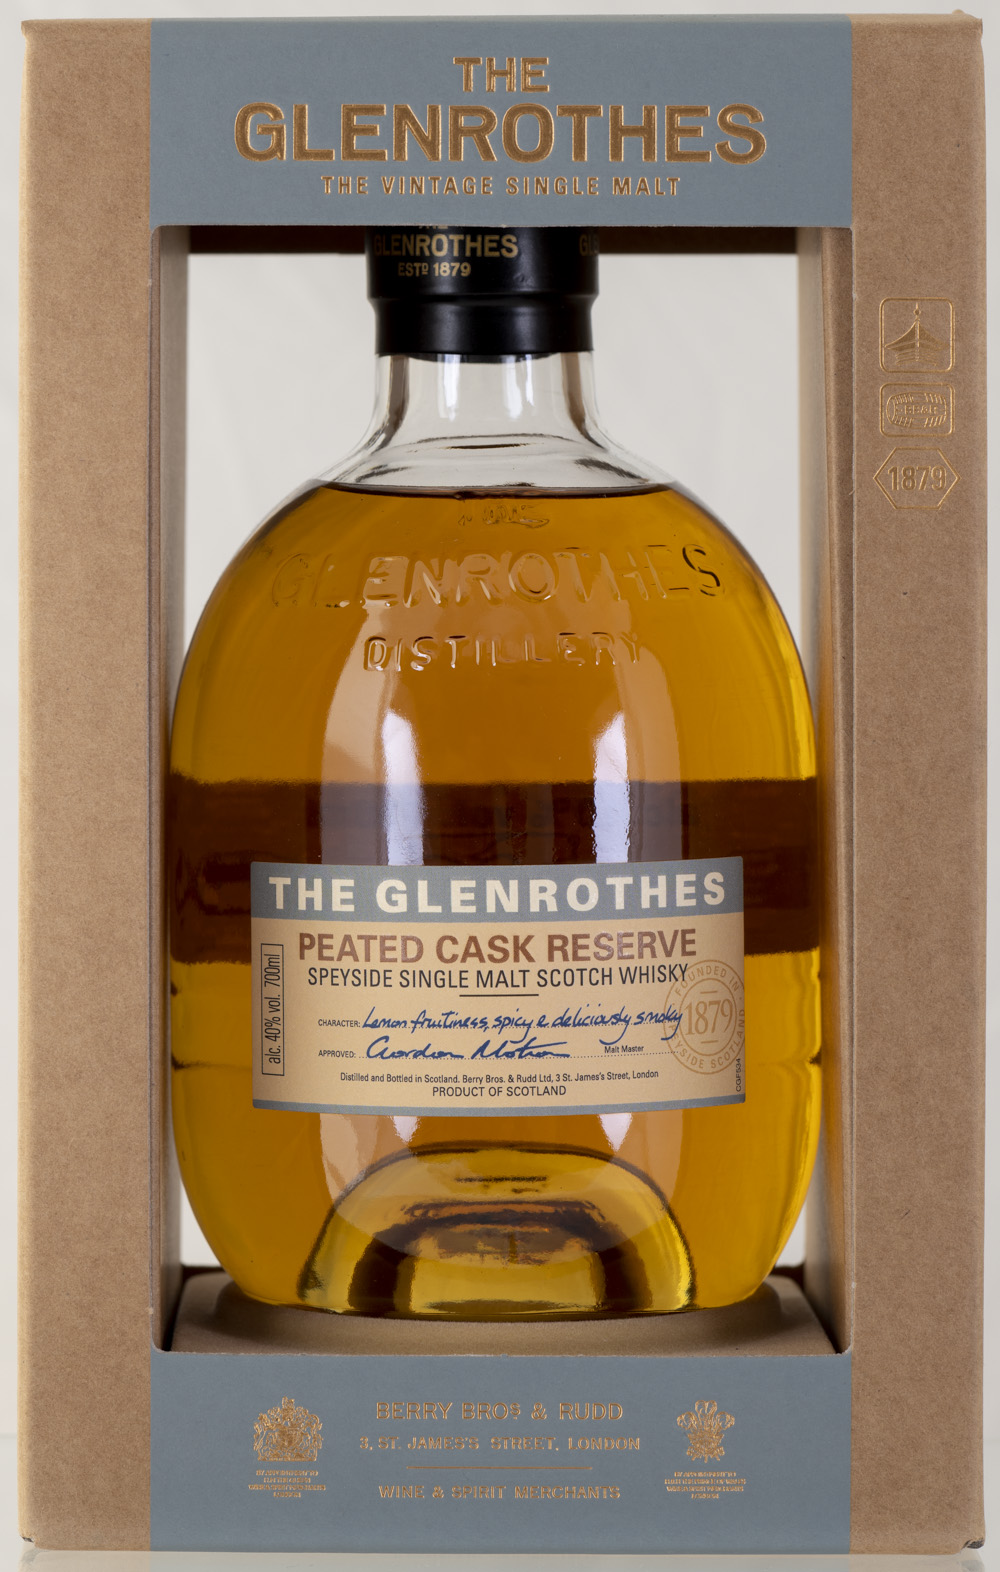 Billede: PHC_2223 - Glenrothes Peated Cask Reserve - box front.jpg